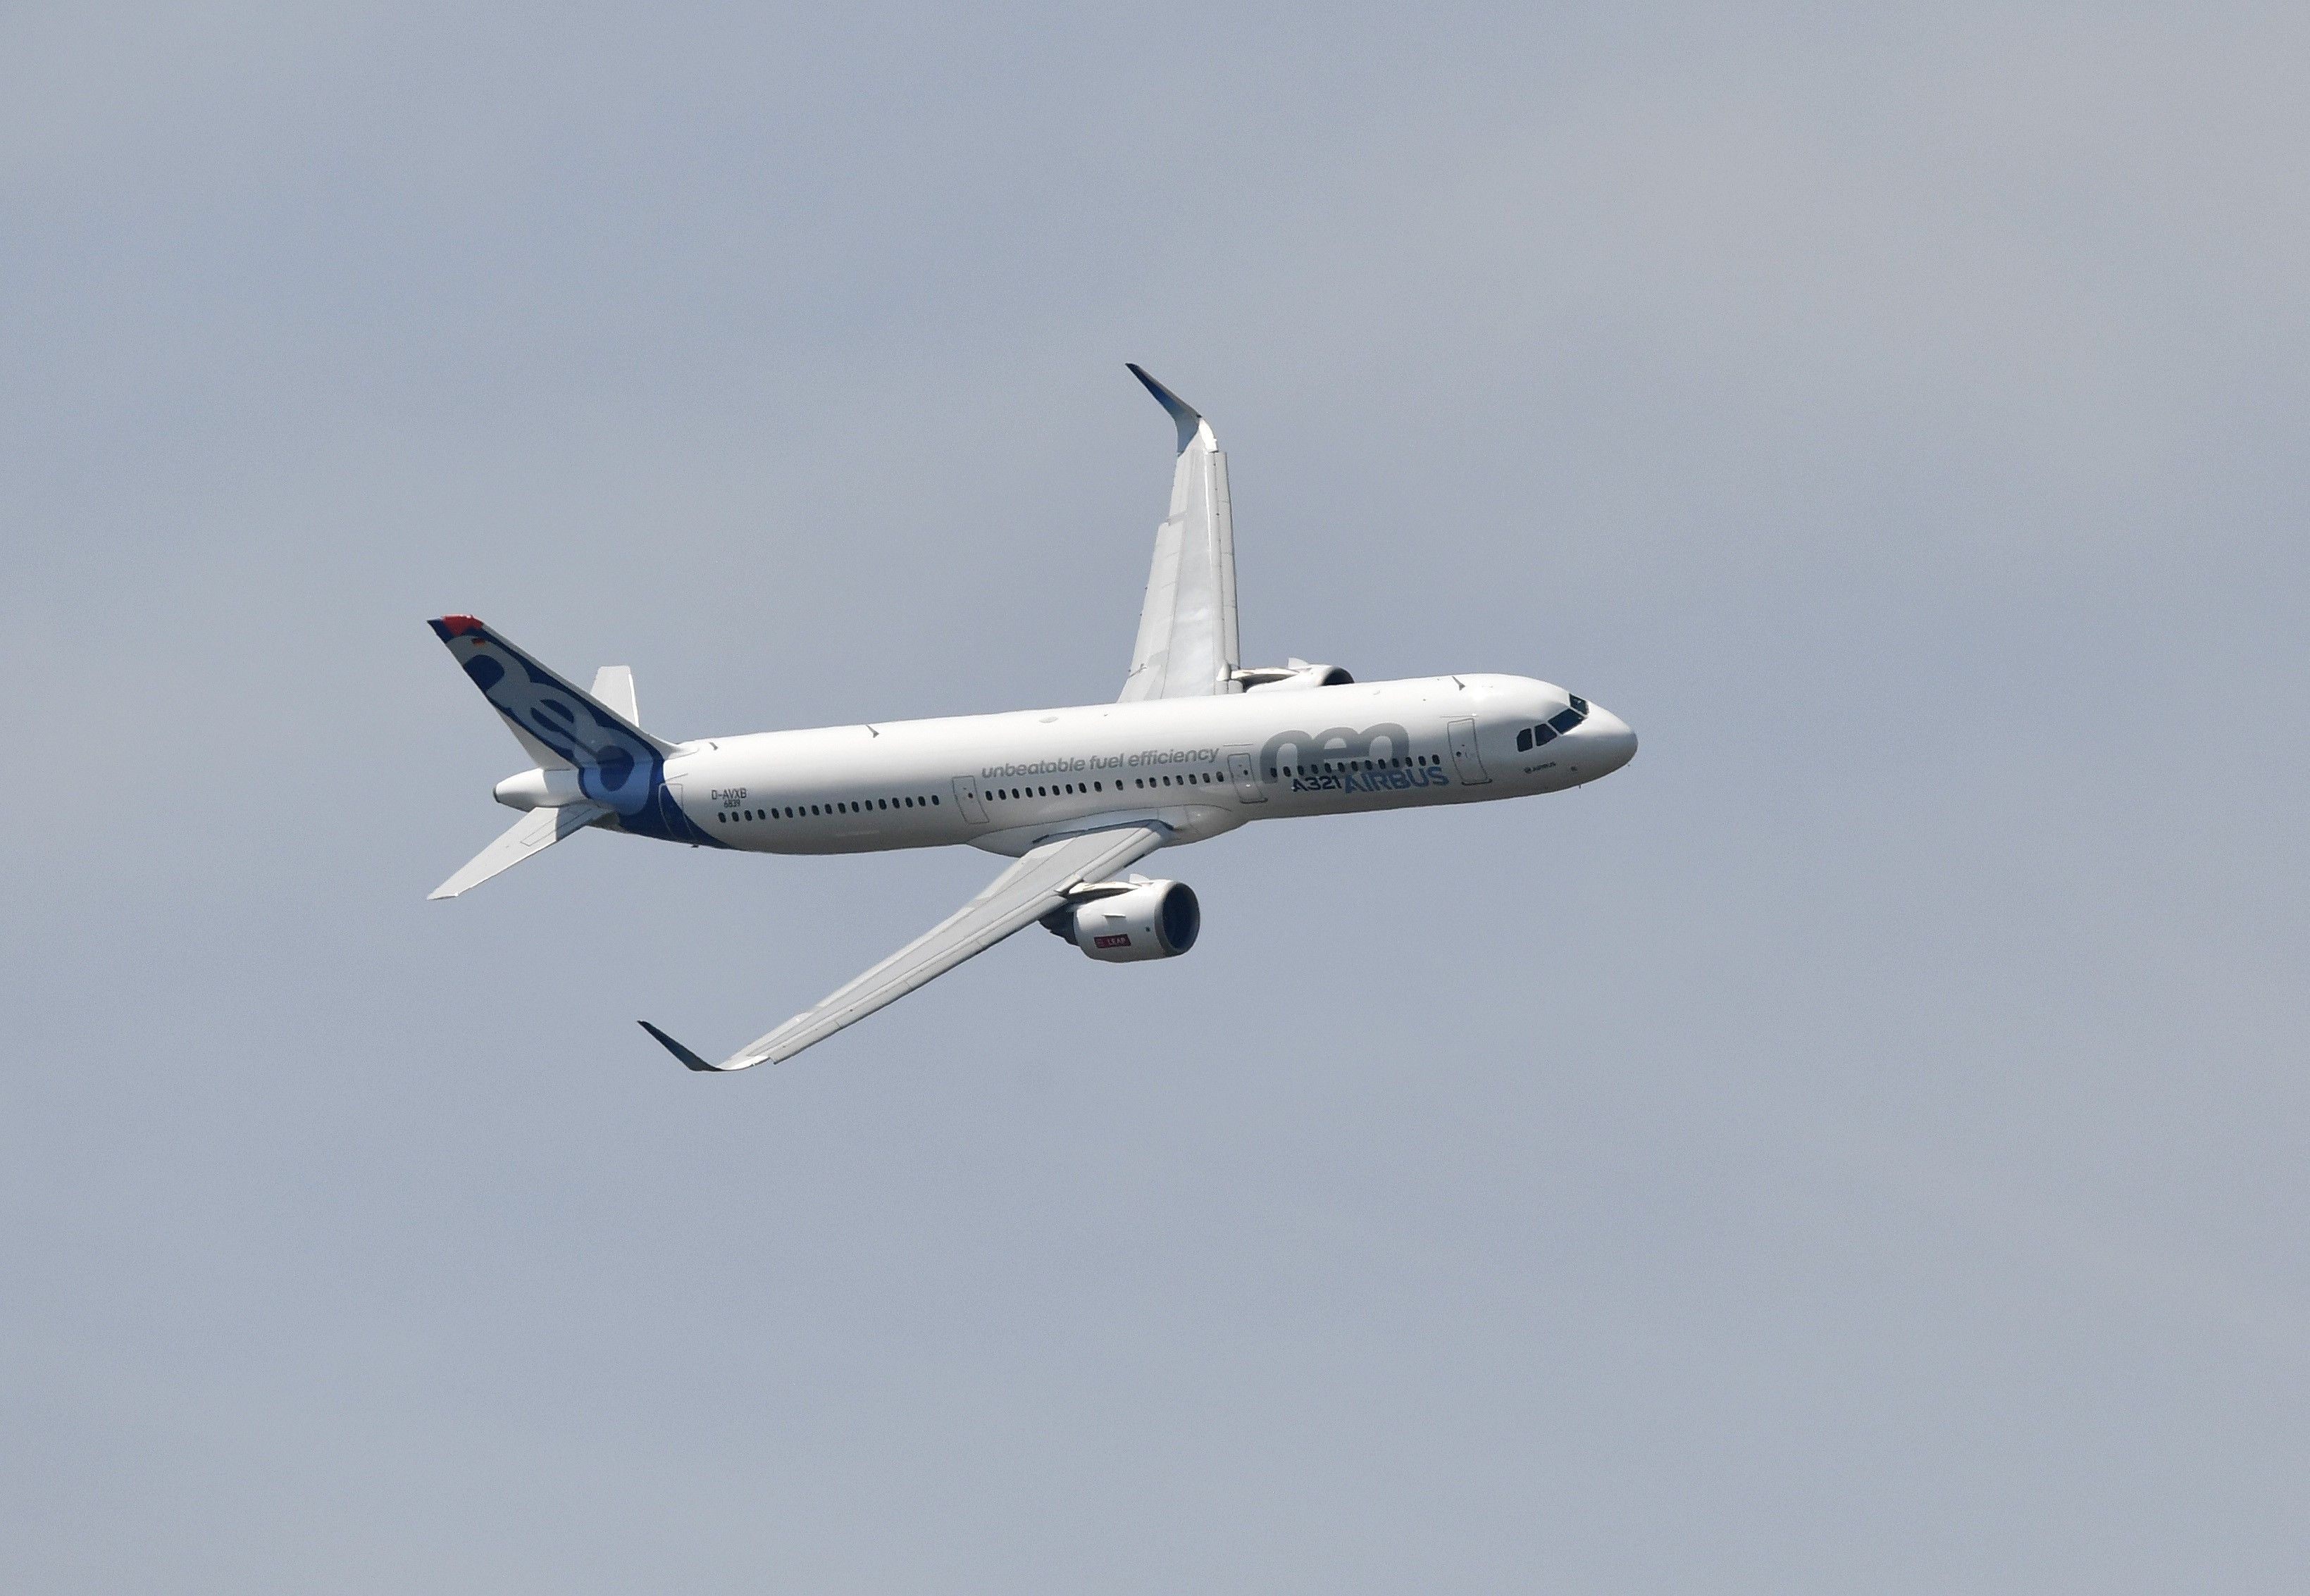  An A321neo of Airbus flies during the 52nd International Paris Air Show at the Le Bourget Airport near Paris, France on June 20, 2017.